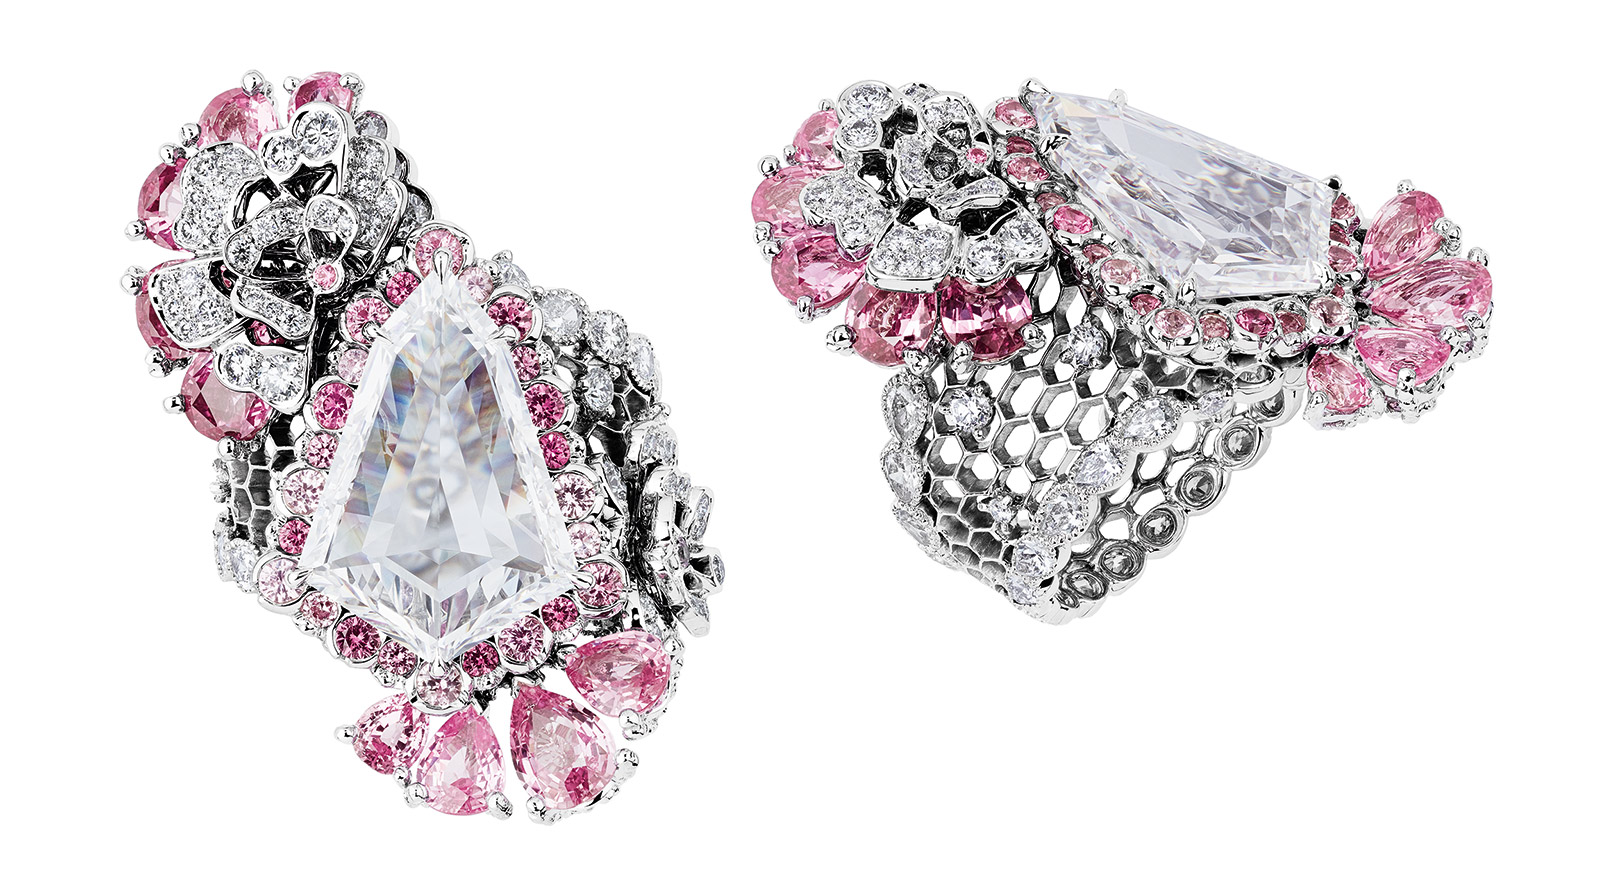 Dior ‘Dentelle Organza’ ring from the 'Dior Dior Dior' collection, with 5.07ct shield / bullet cut diamond, pink sapphires and accenting diamonds